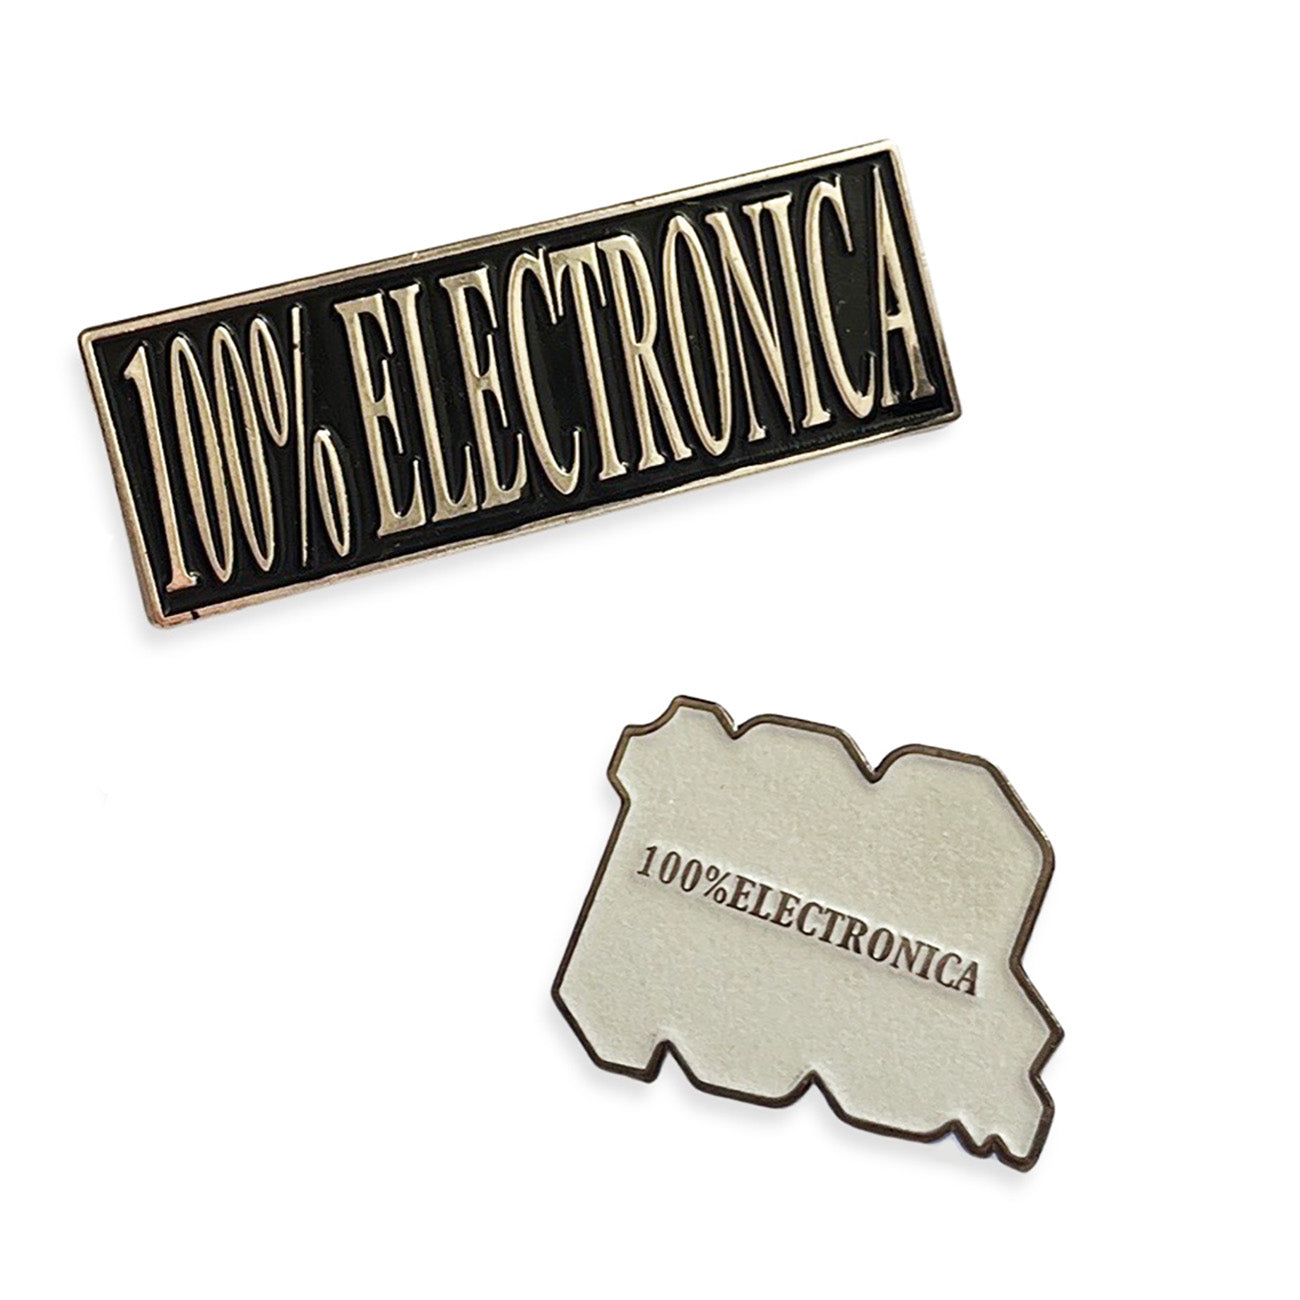 100% Electronica Pins (2-pack)